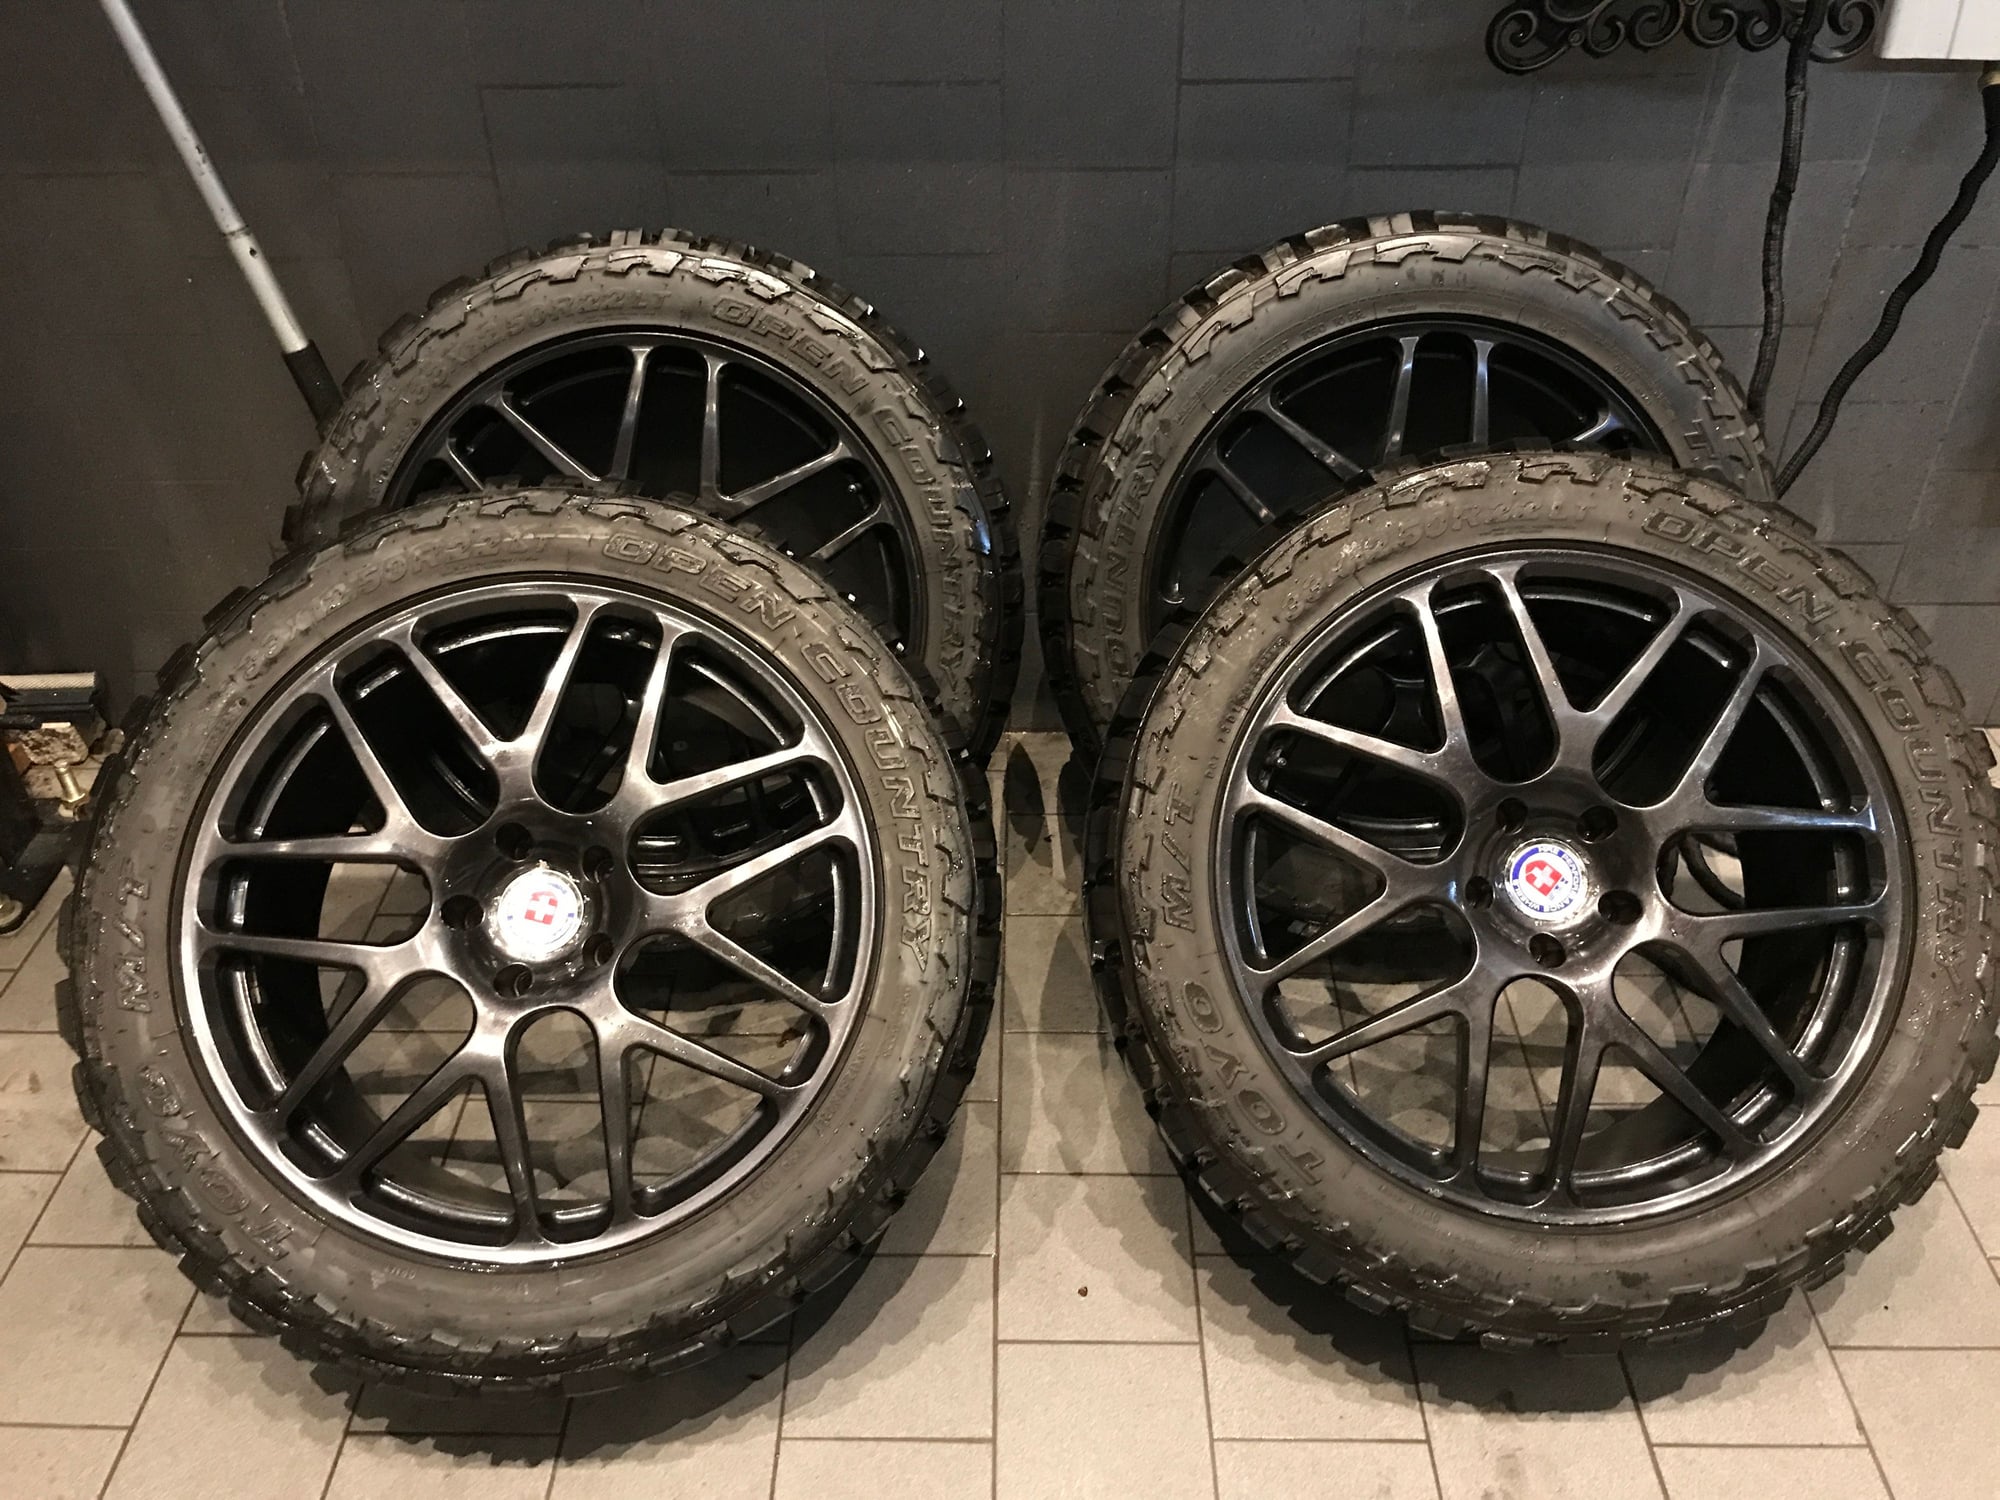 Wheels and Tires/Axles - Mercedes G-Class HRE Wheel Set / Toyo Open Country - Used - 2003 to 2018 Mercedes-Benz G63 AMG - Laval, QC H7X3K0, Canada